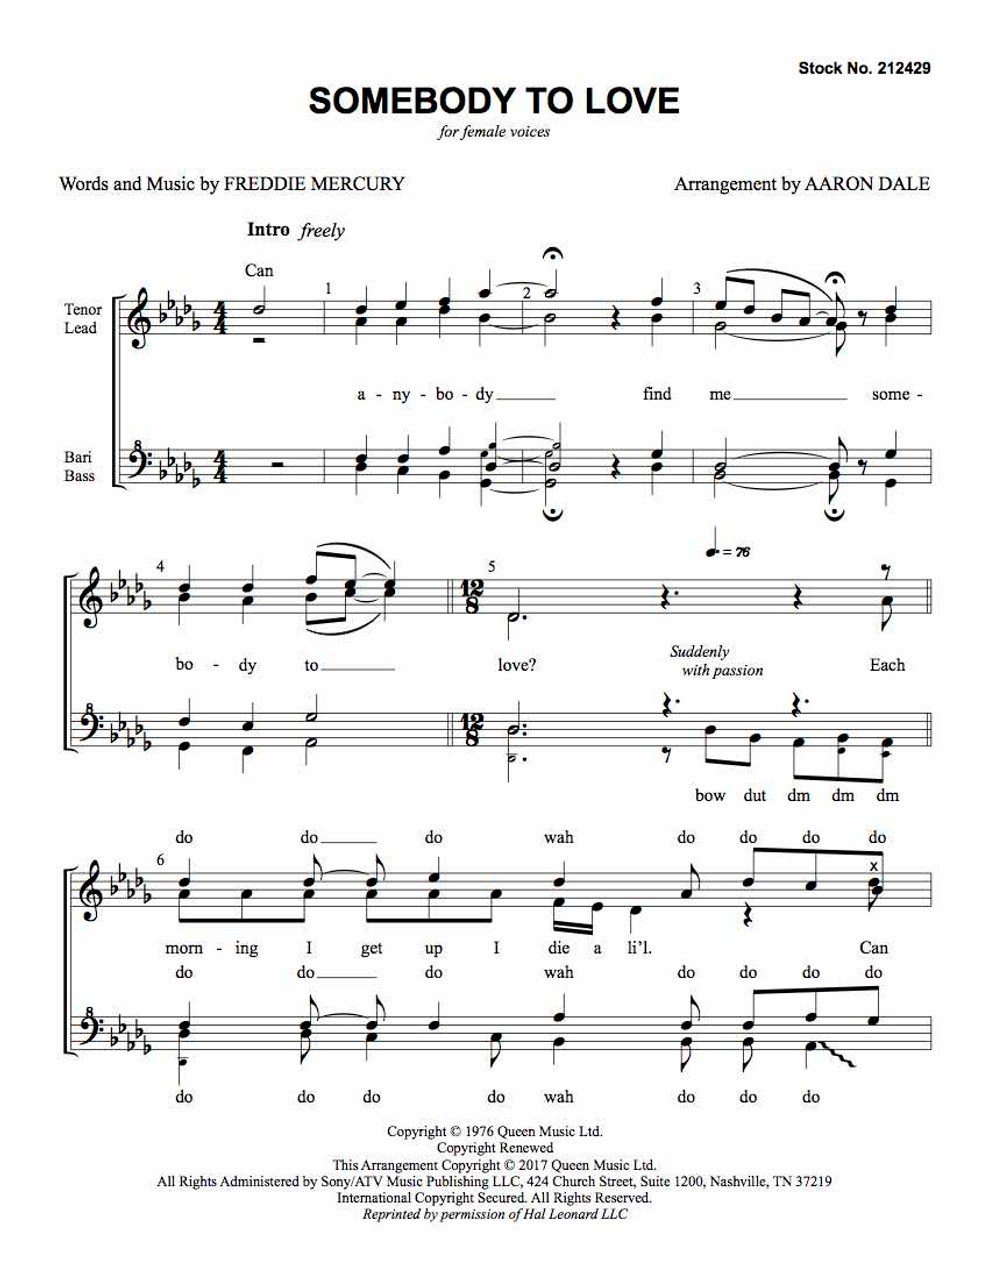 Somebody to Love (SSAA) (arr. Dale)